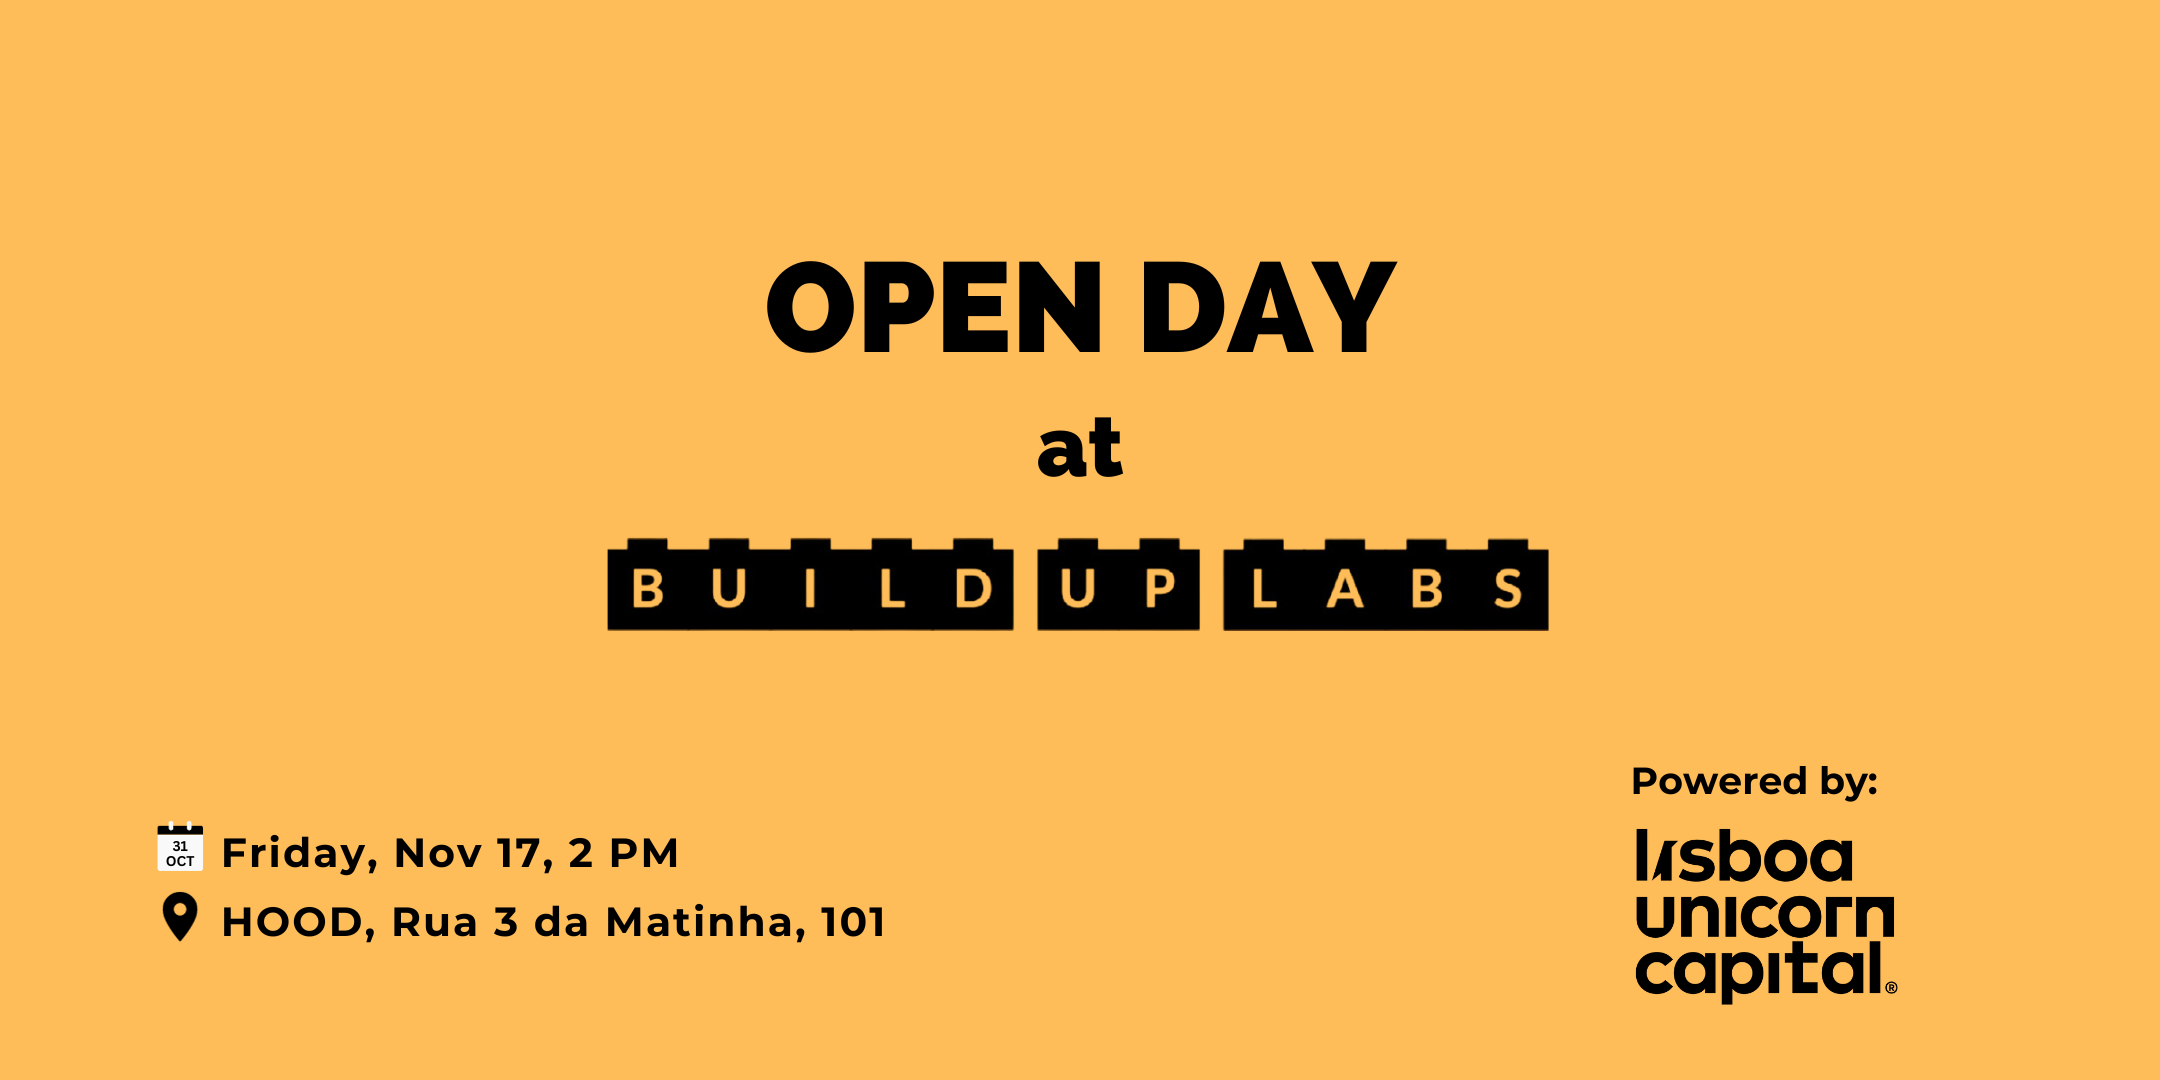 Open Day @ Build Up Labs